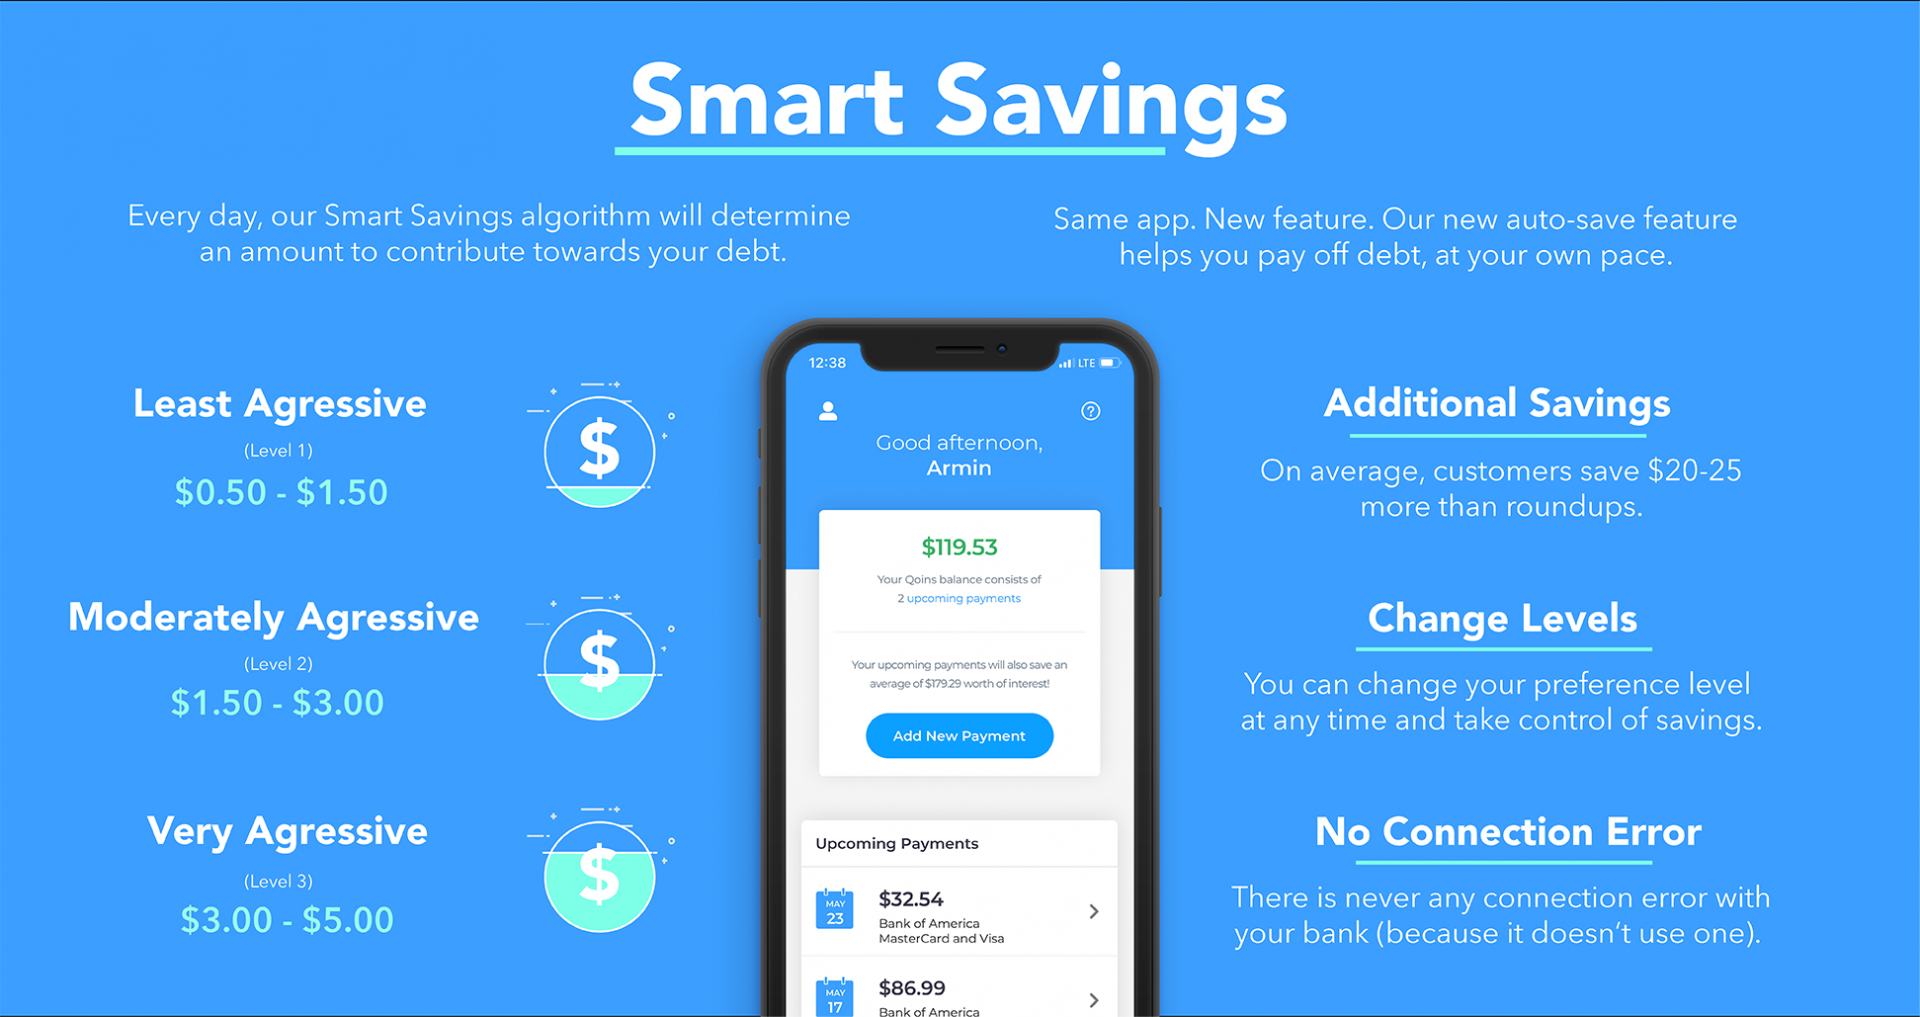 Different Qoins Smart Savings levels. Images courtesy of Qoins.